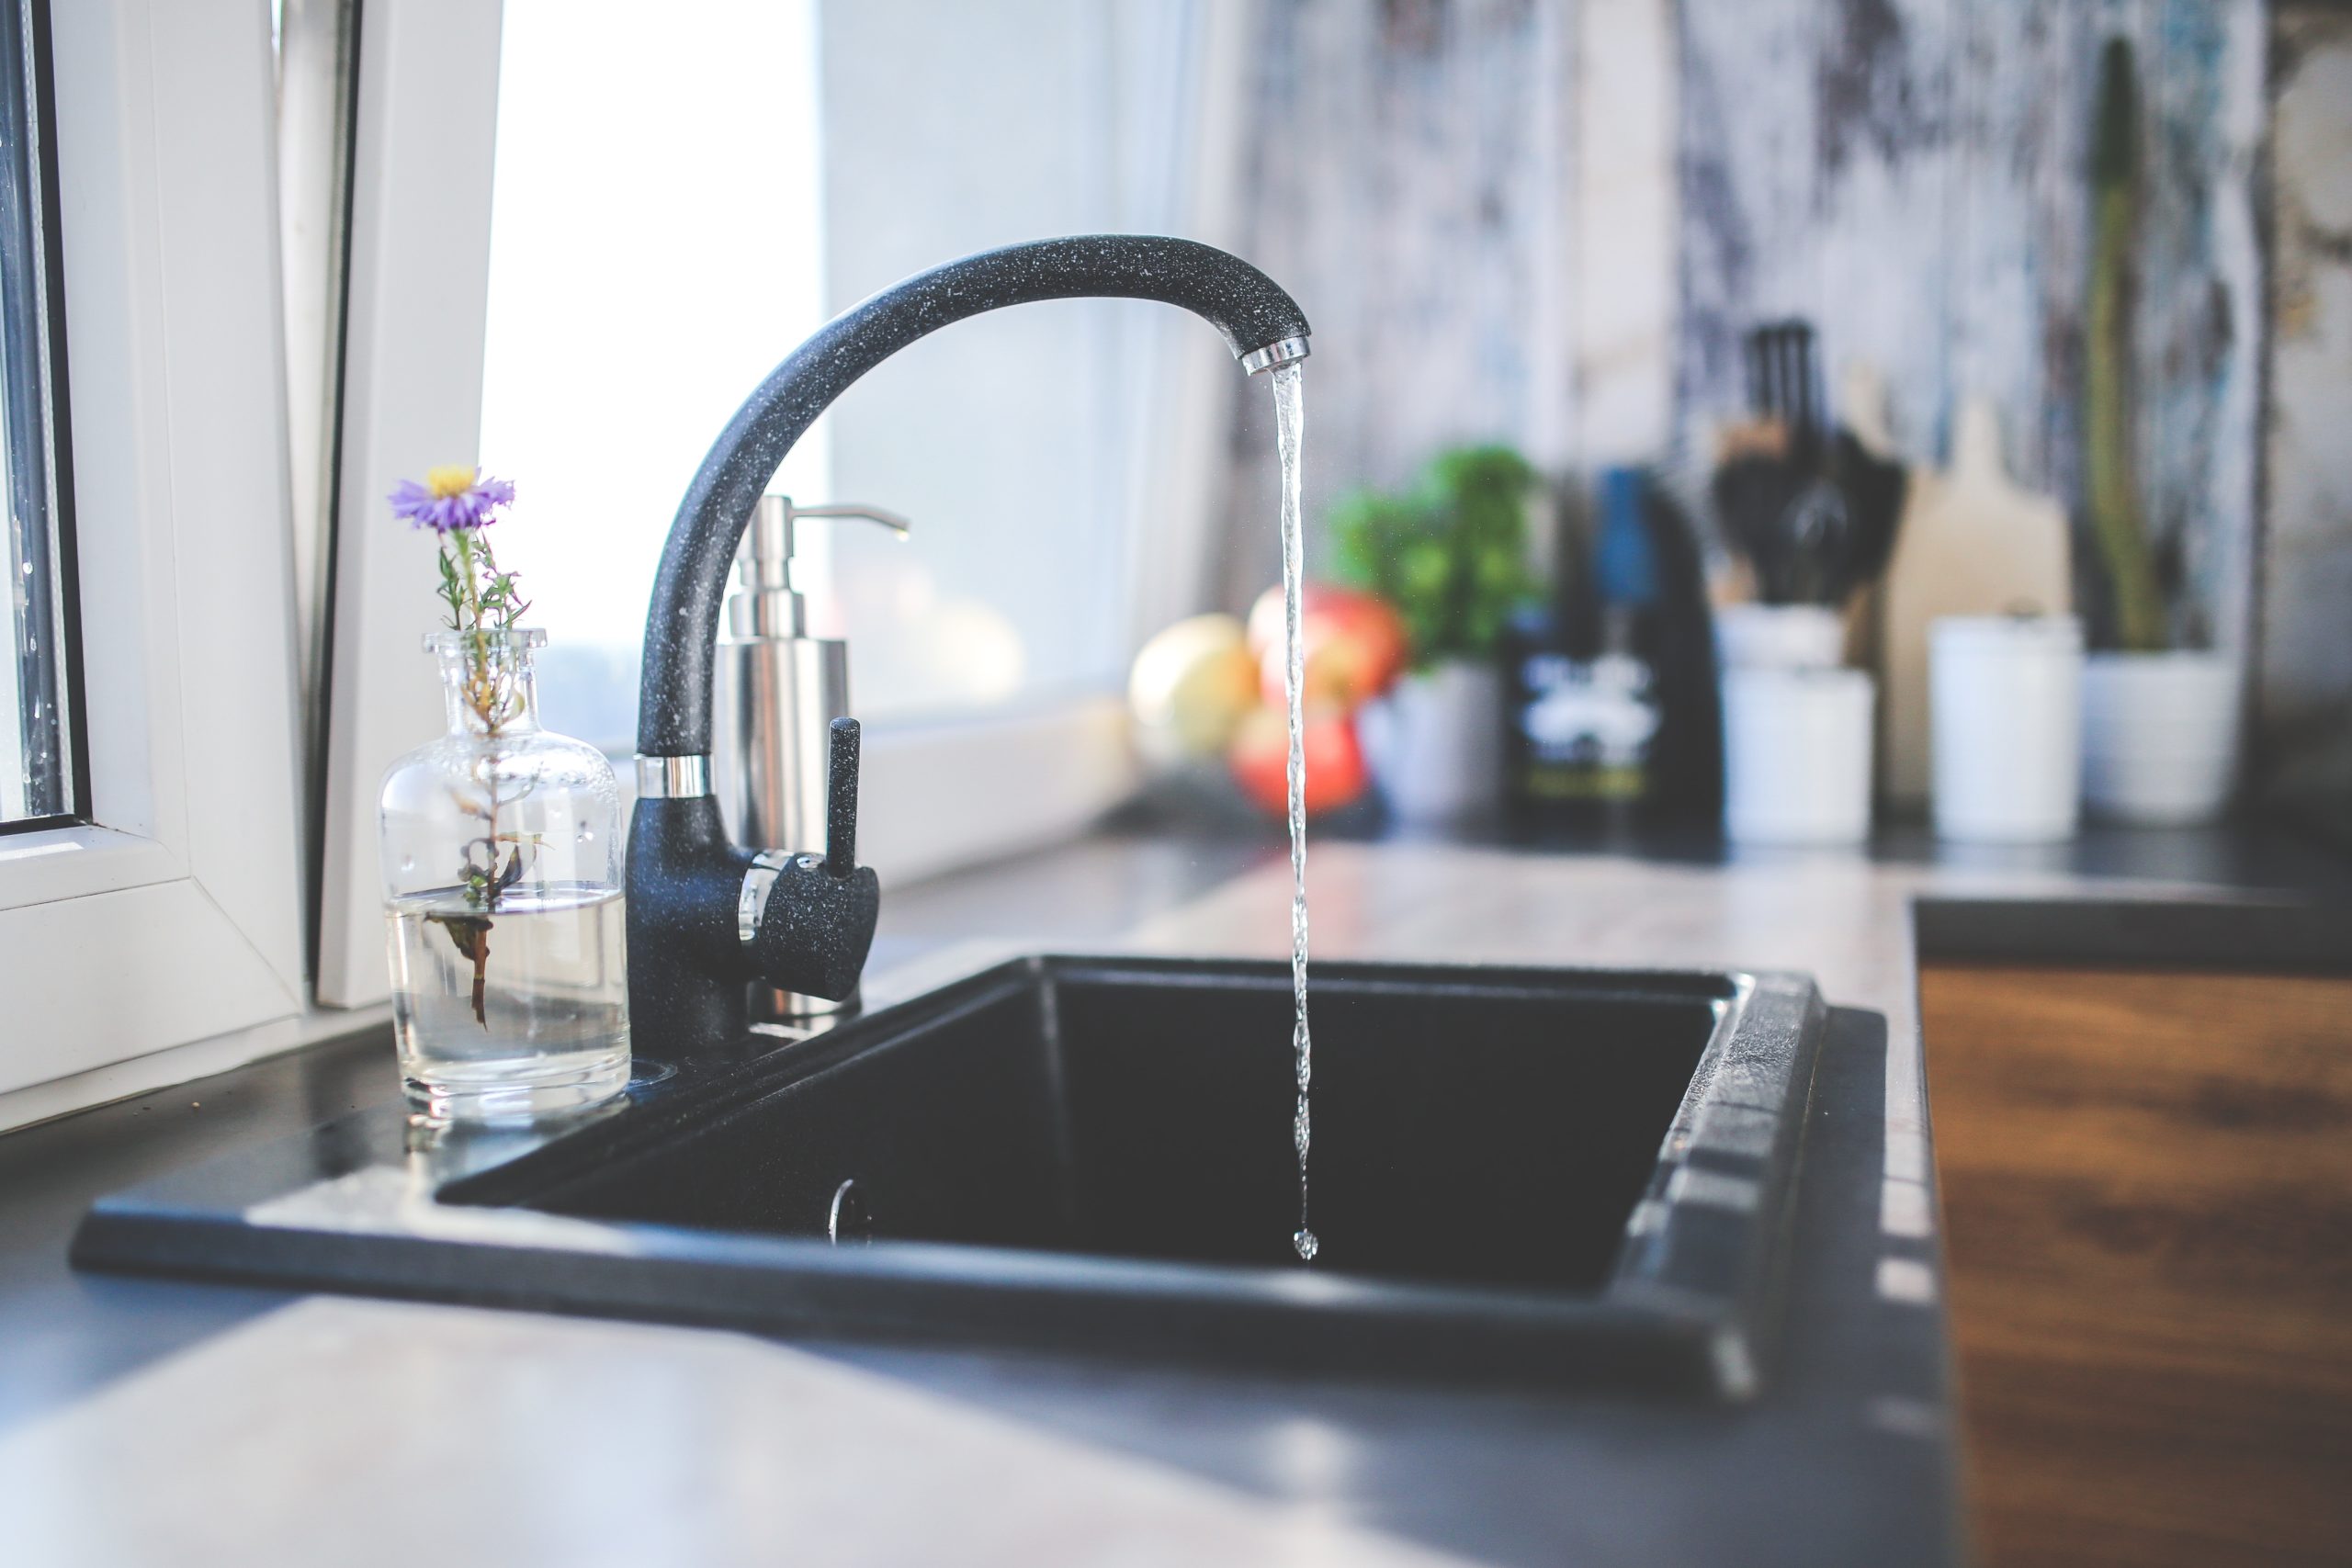 Replacing your Kitchen Sink